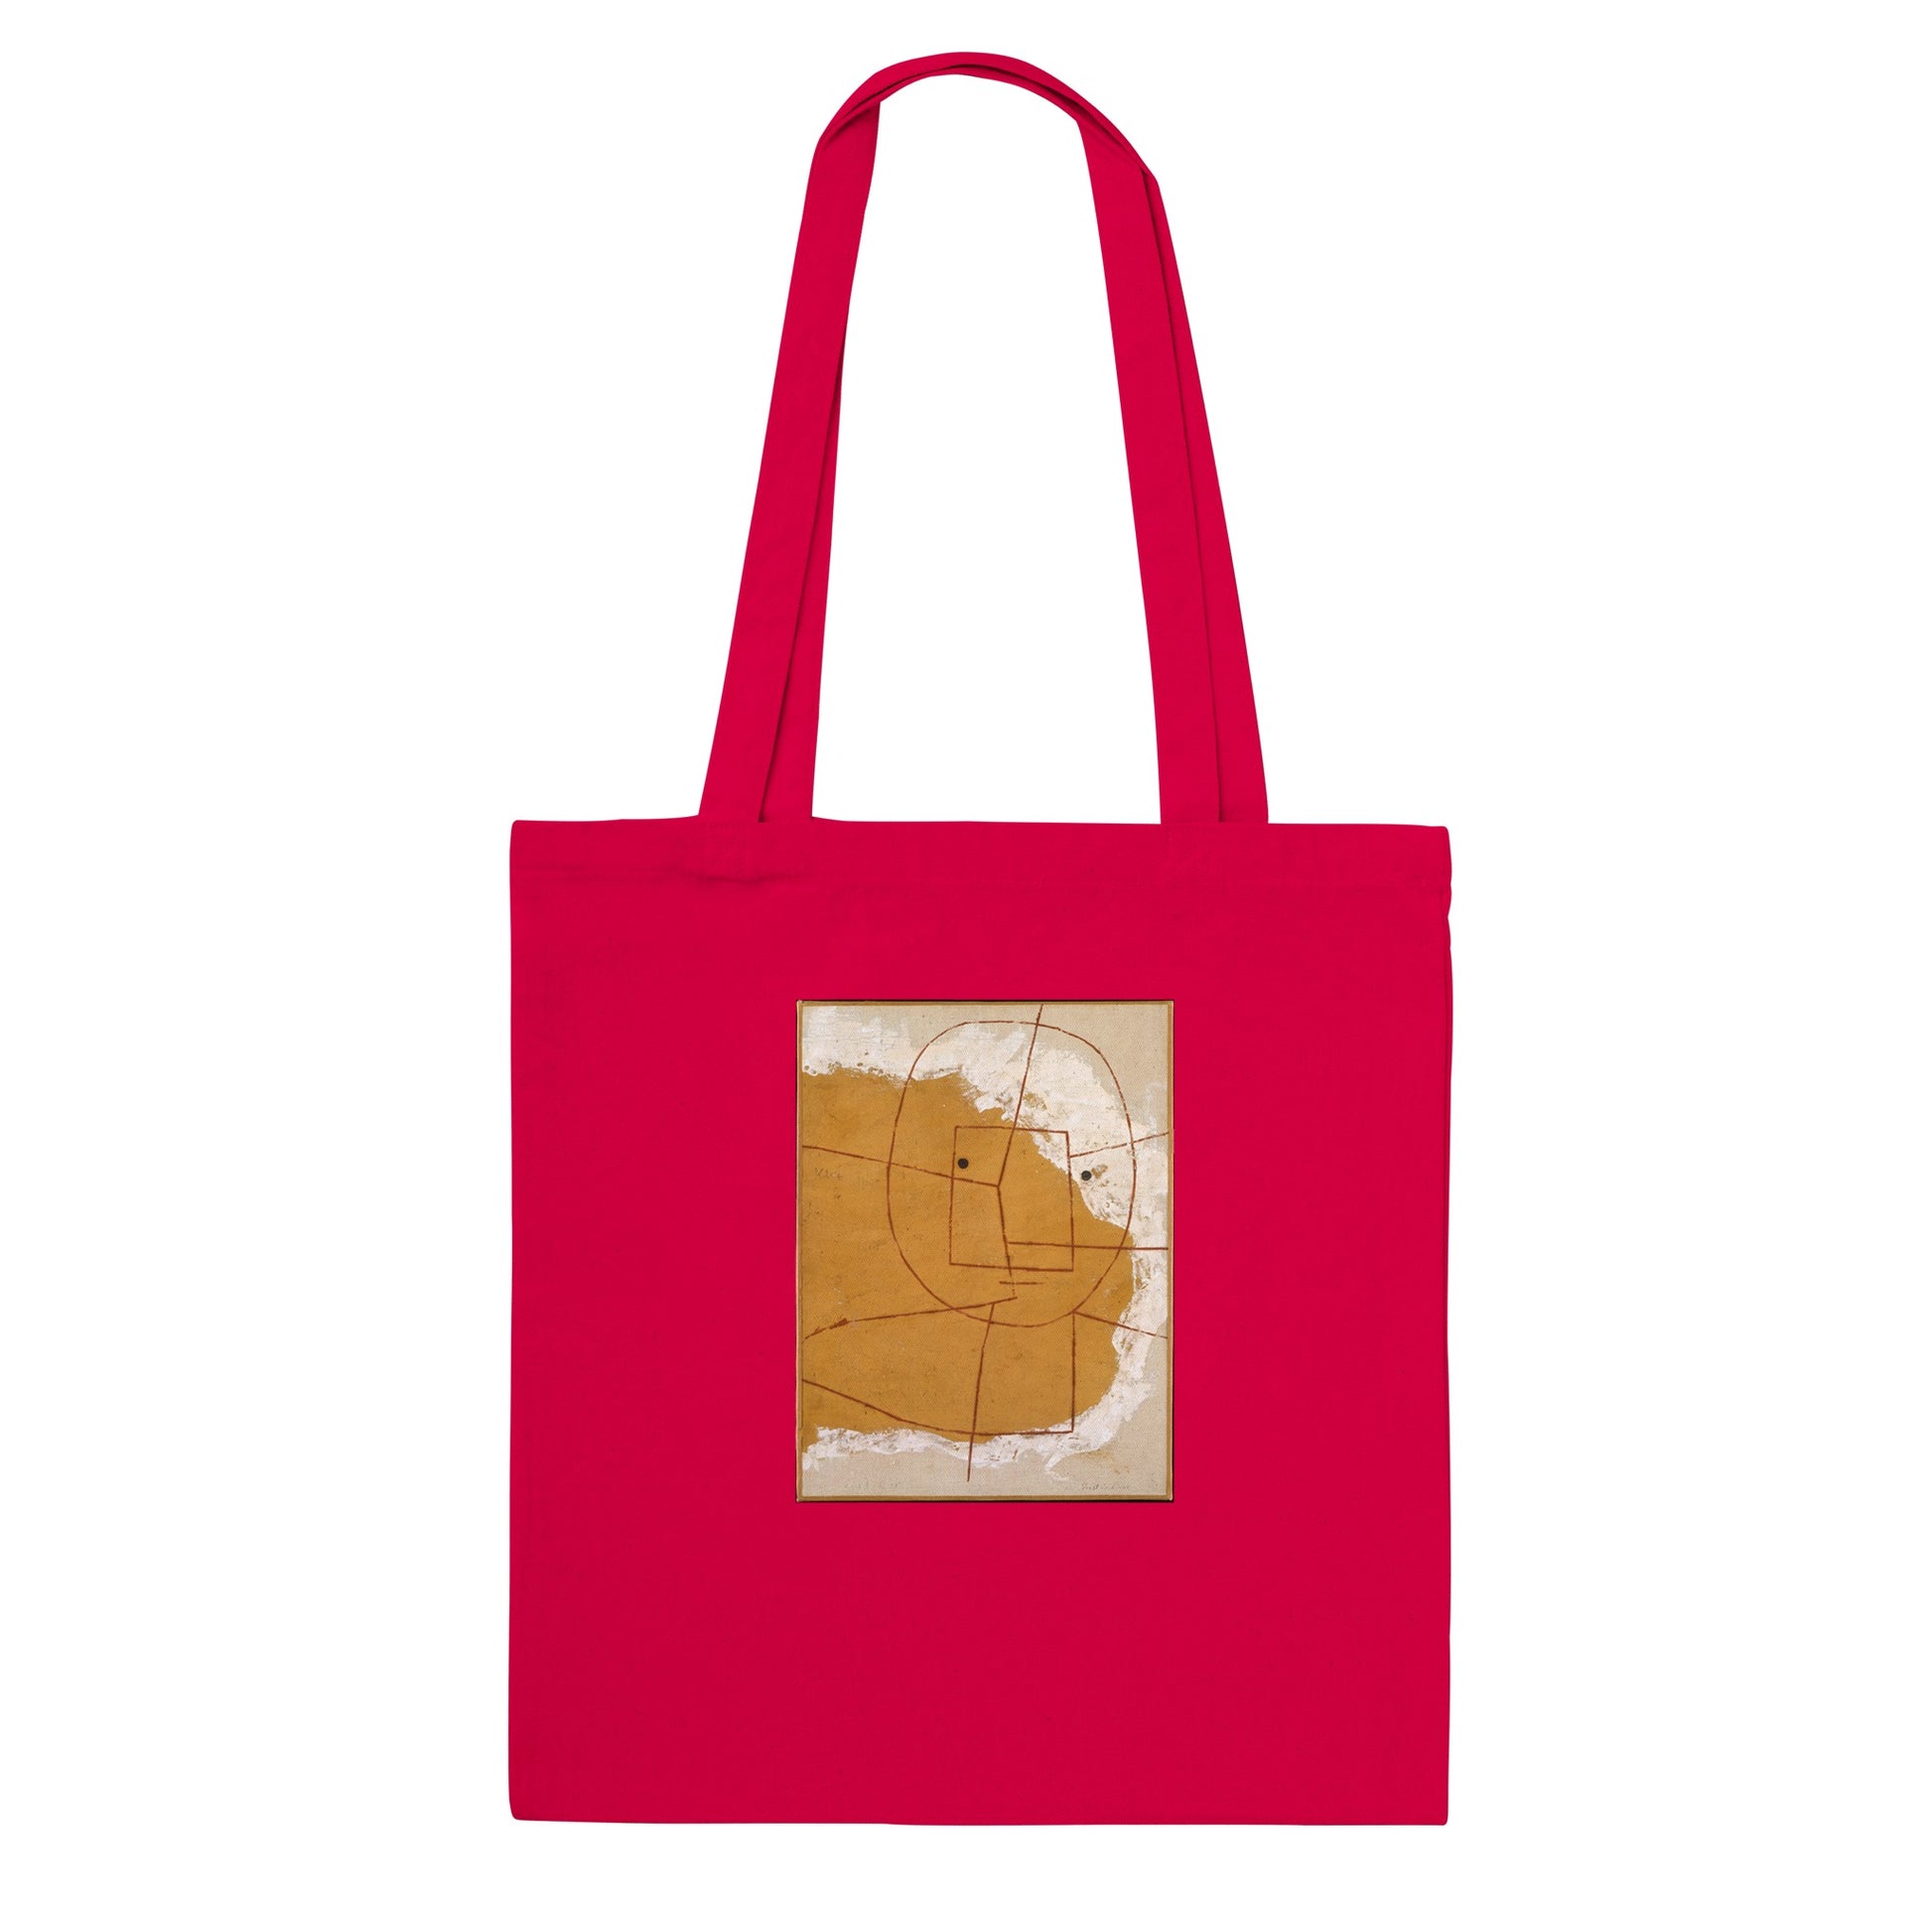 PAUL KLEE - ONE WHO UNDERSTANDS - CLASSIC TOTE BAG 